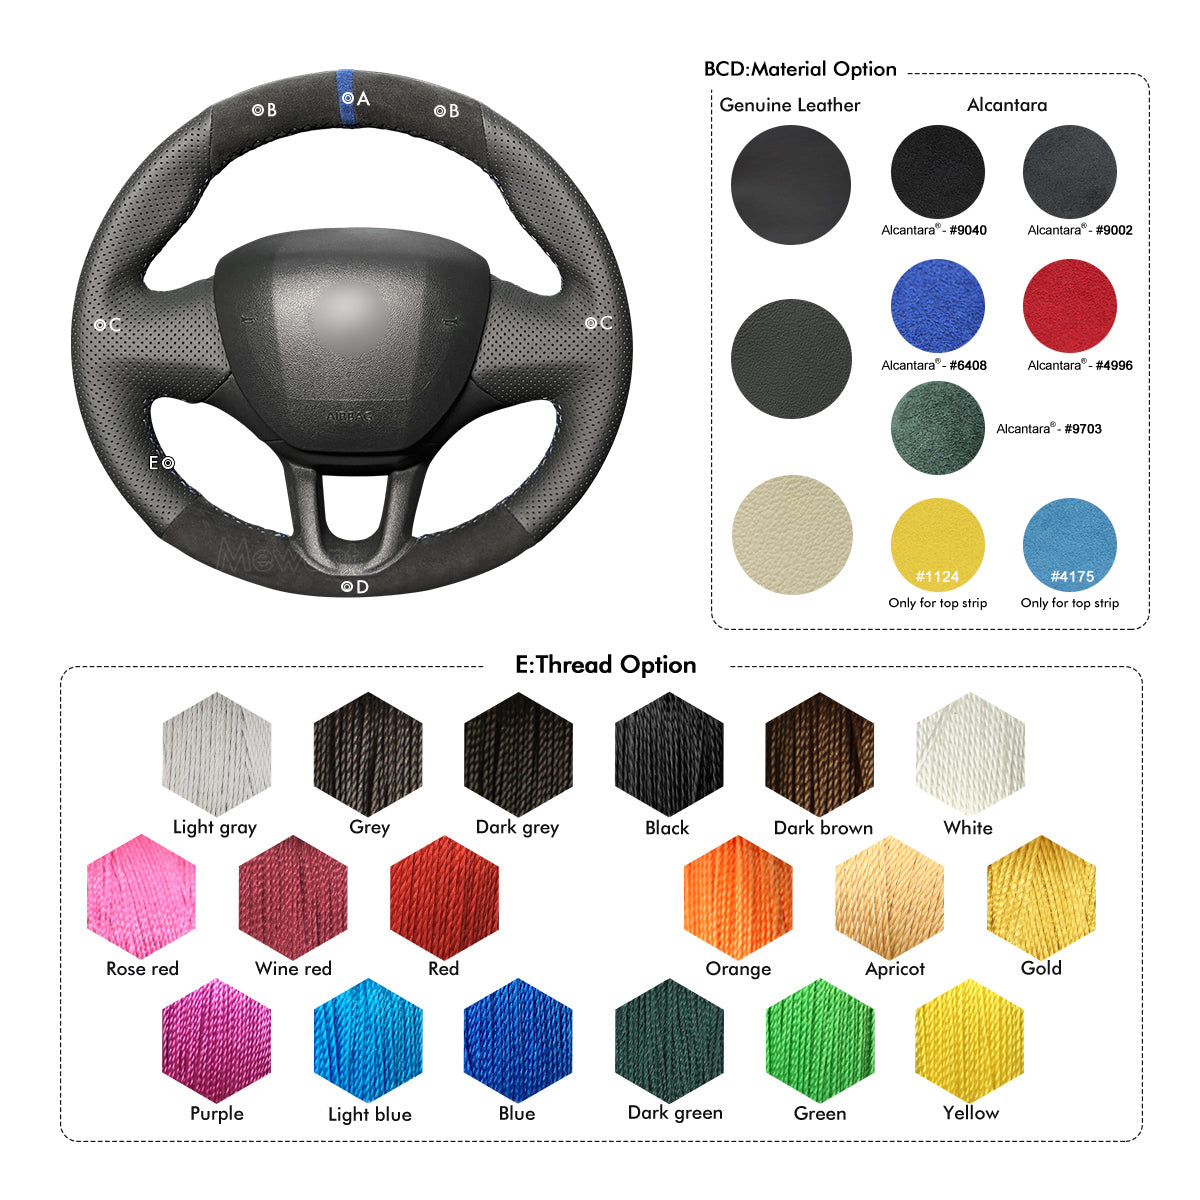 MEWANT Hand Stitch Car Steering Wheel Cover for Peugeot 208 2012-2019 / 2008 2013-2019 / 308 2013-2018 / 308 SW 2014-2017